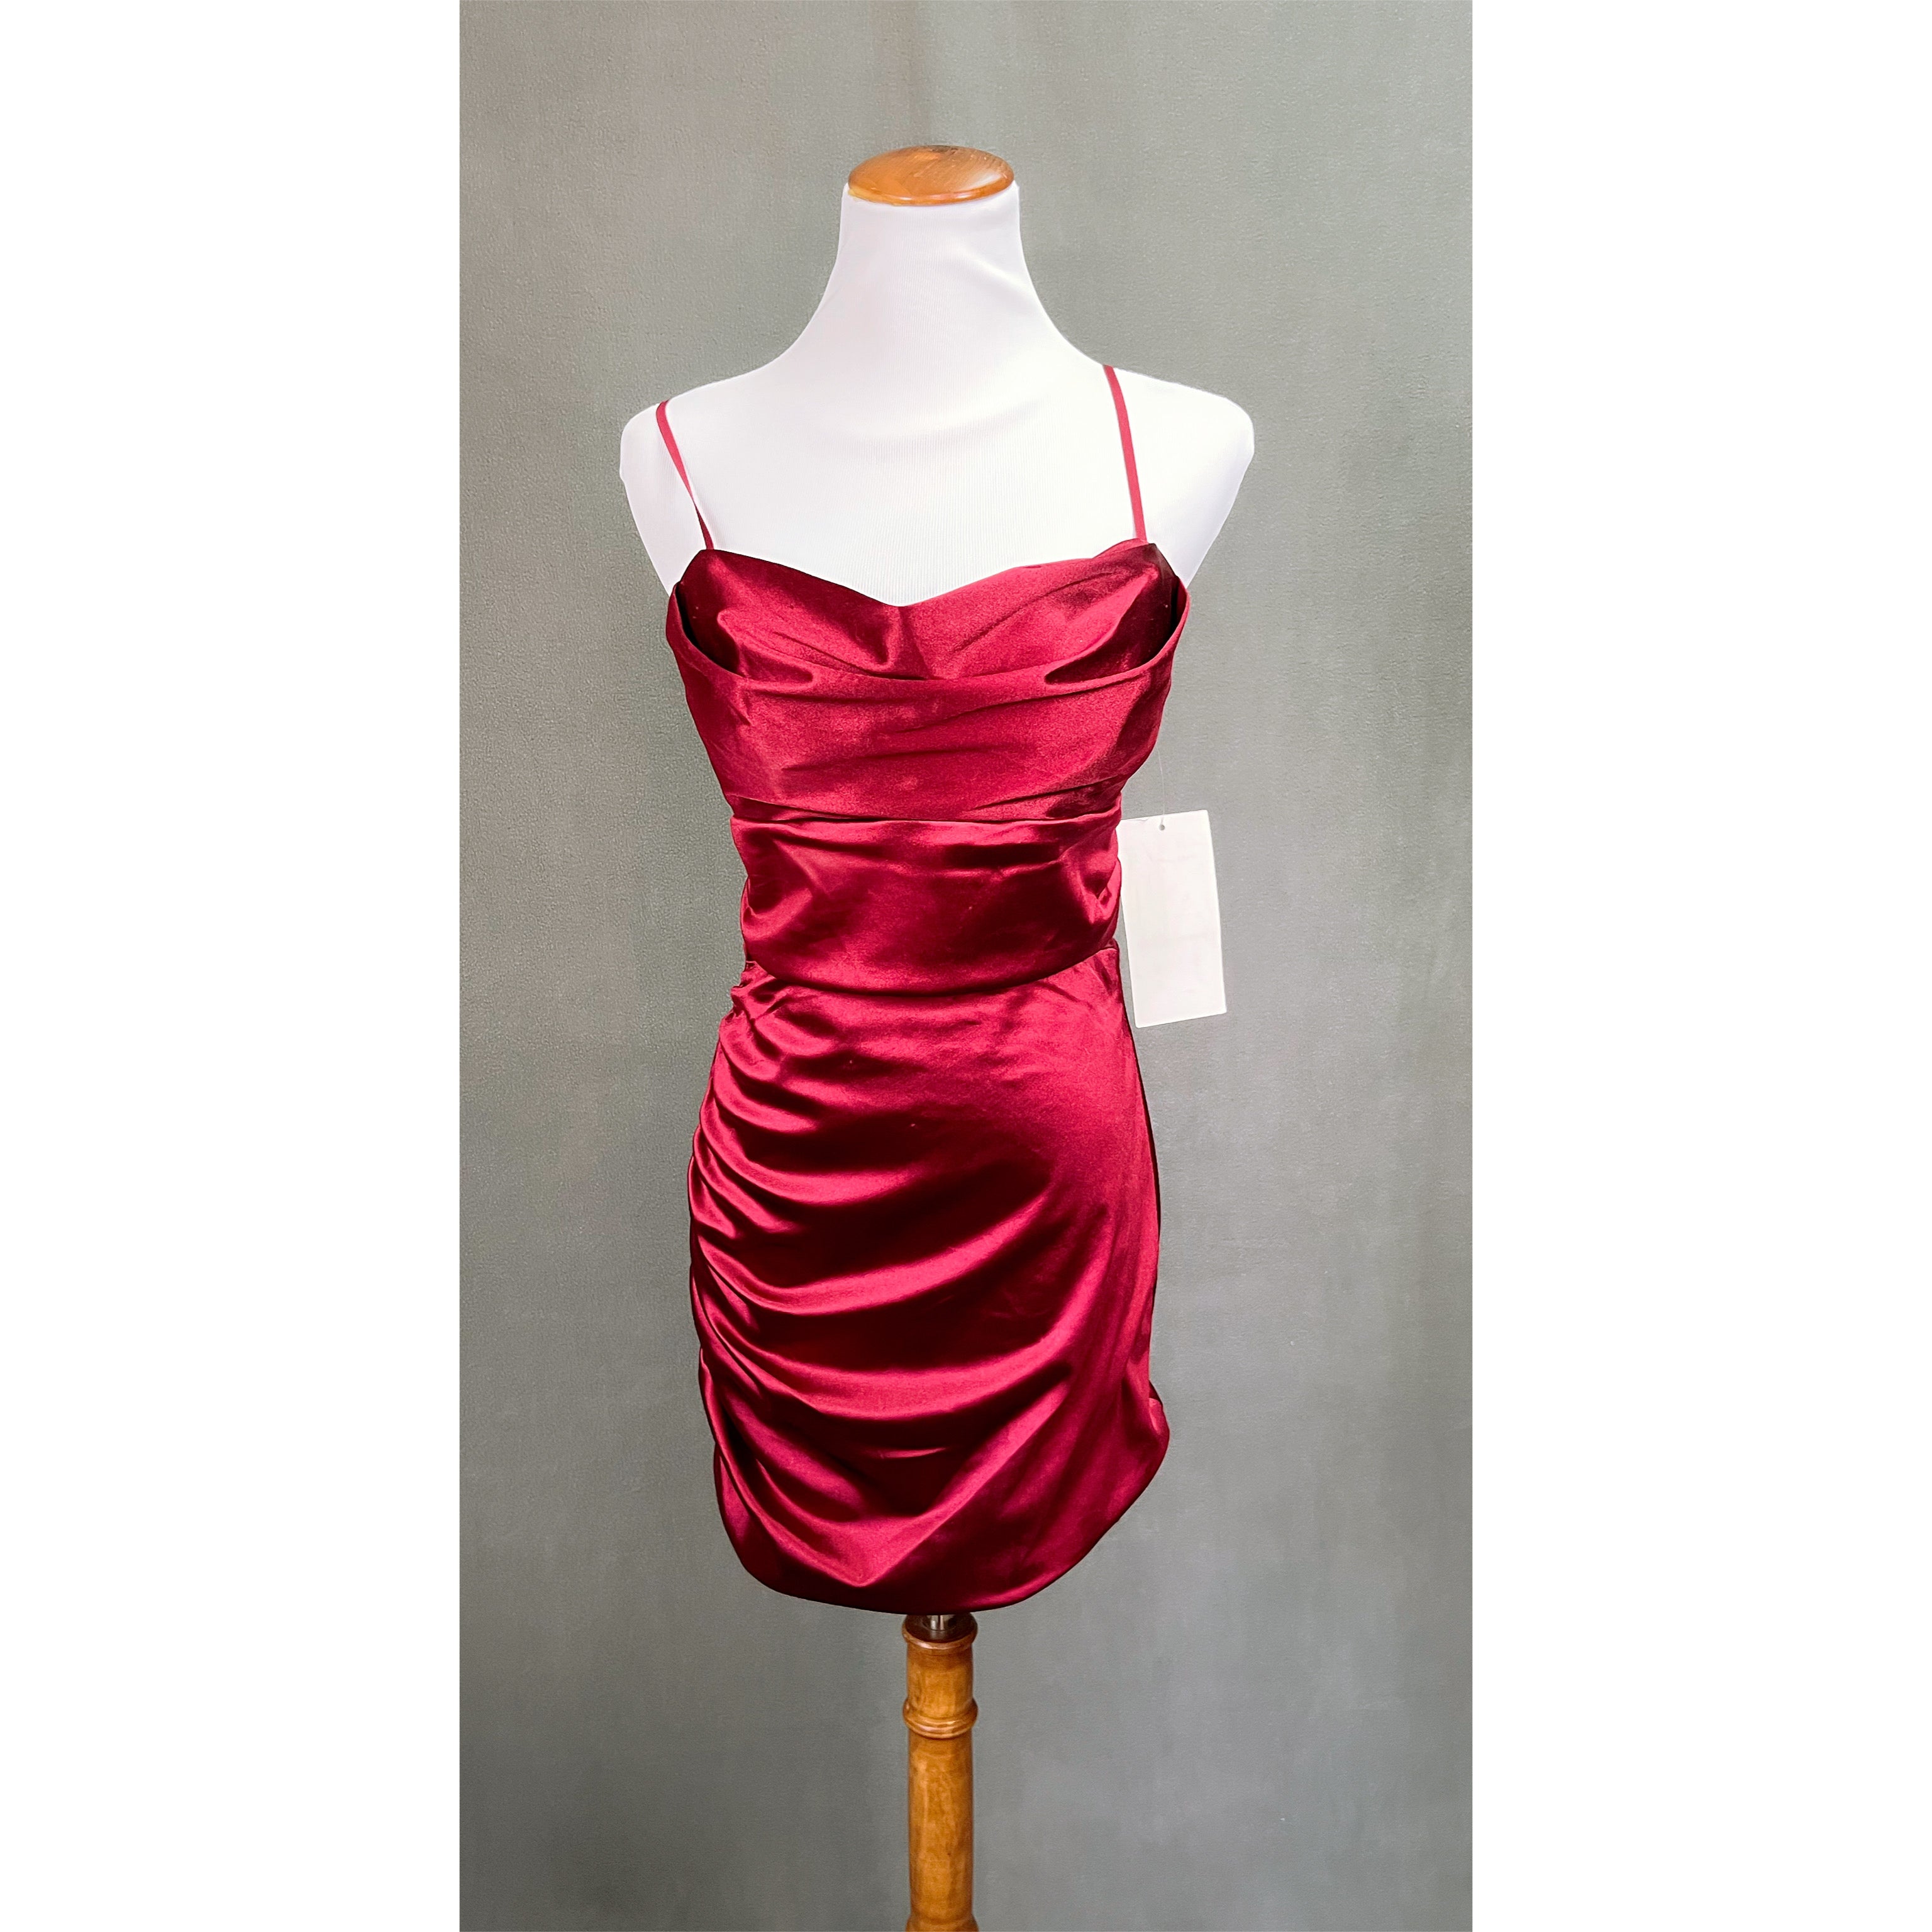 Honey & Rose red 2-piece dress, NEW WITH TAGS!